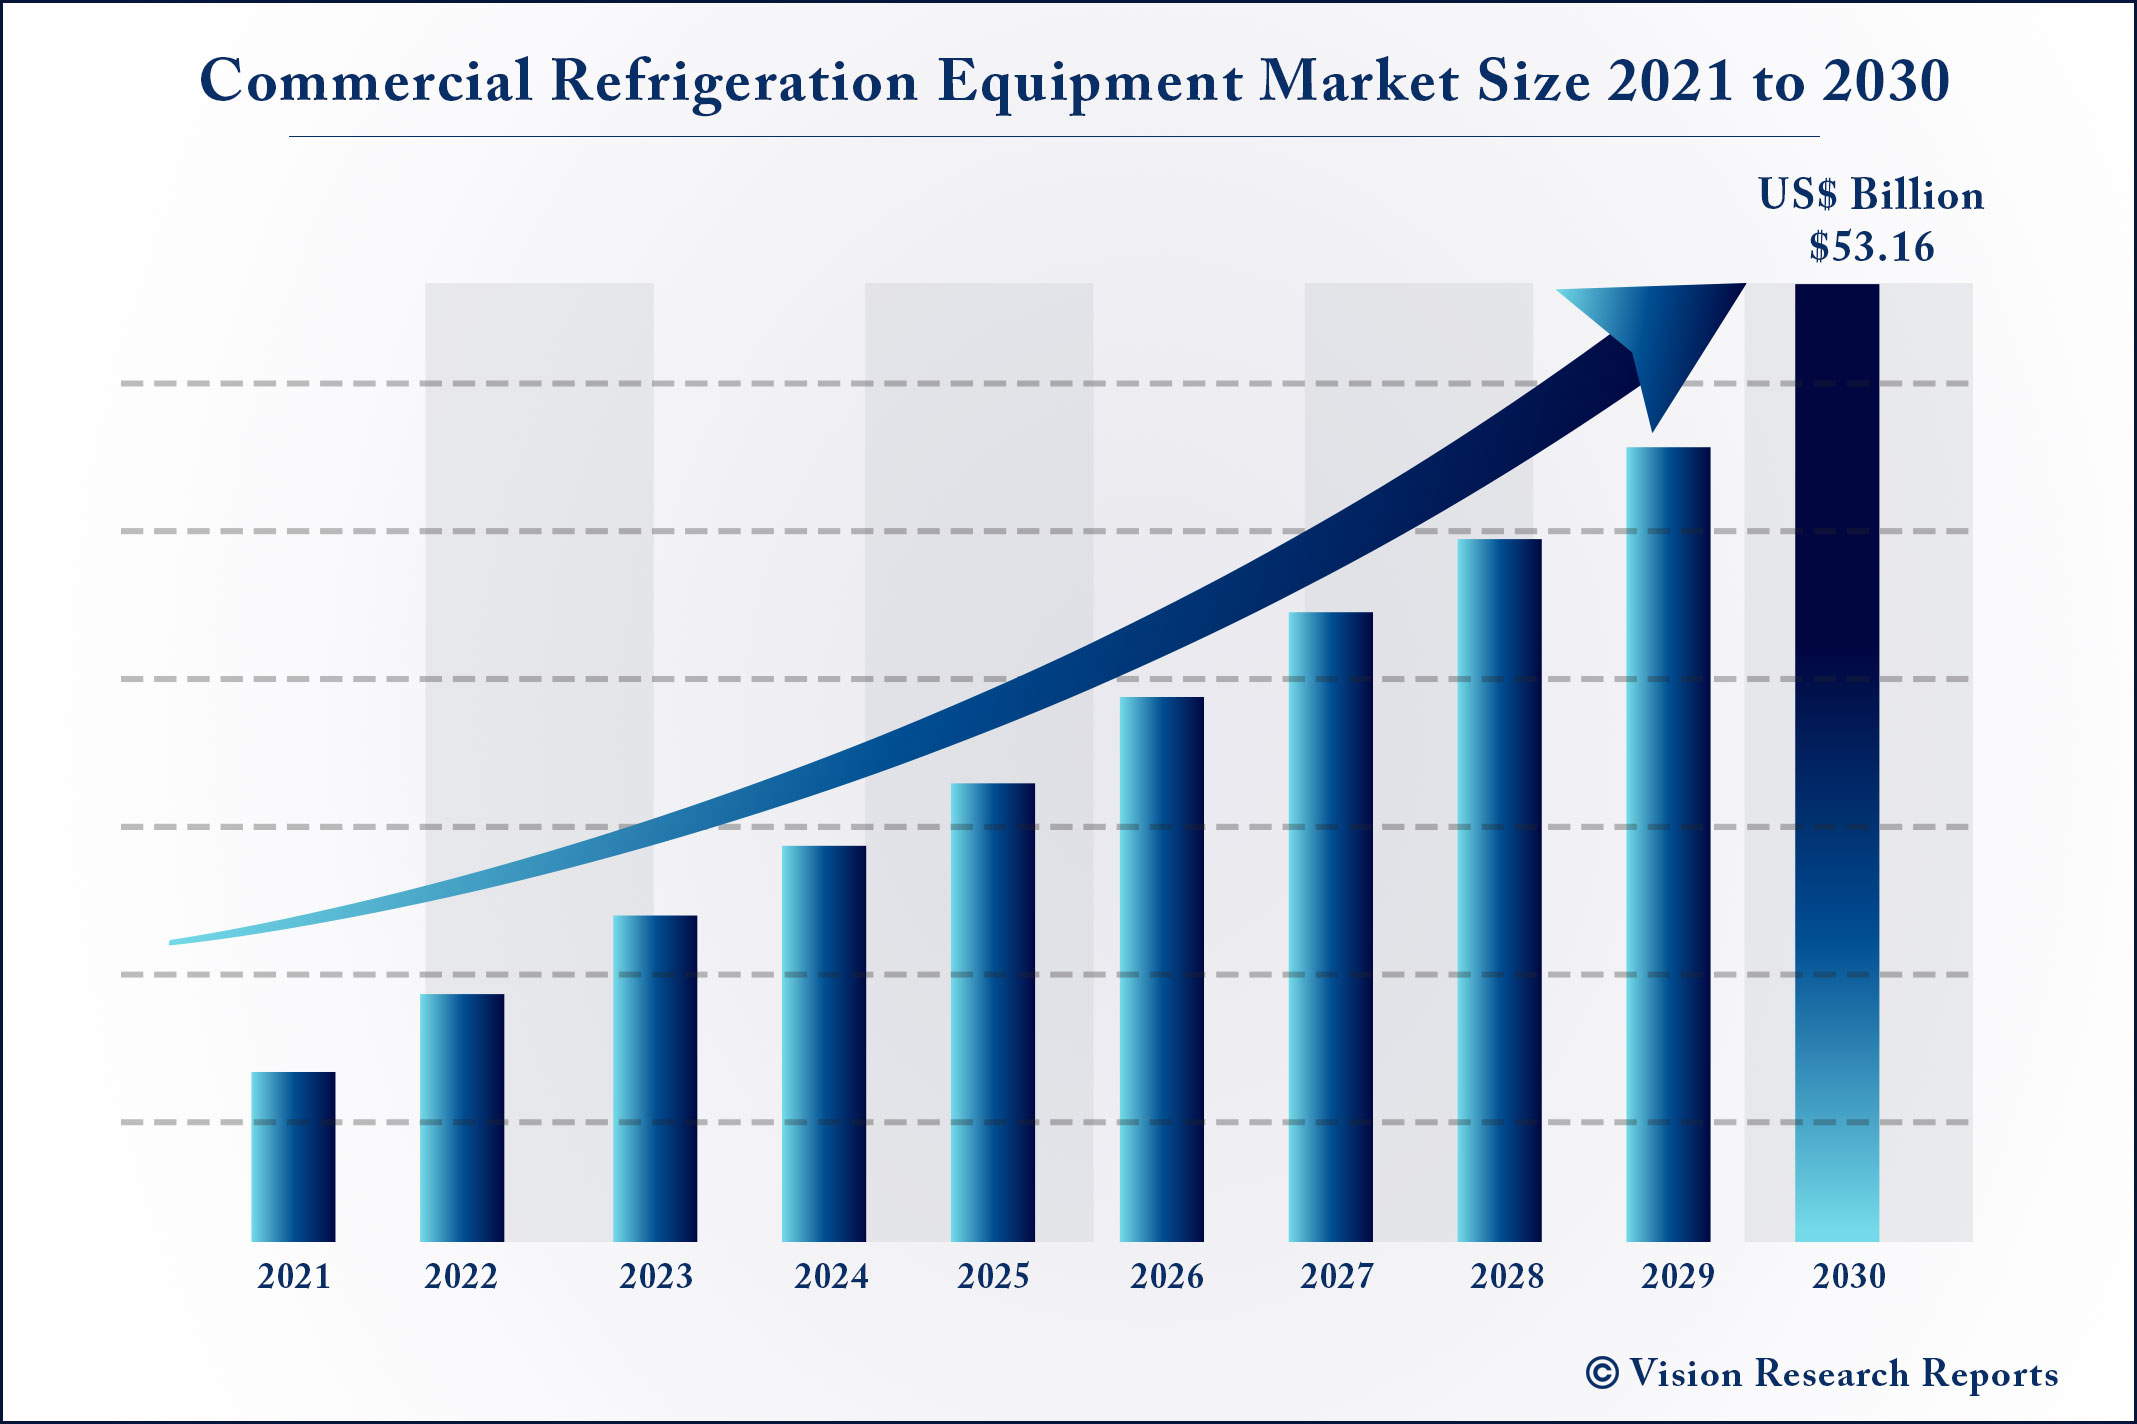 Commercial Refrigeration Equipment Market Size 2021 to 2030